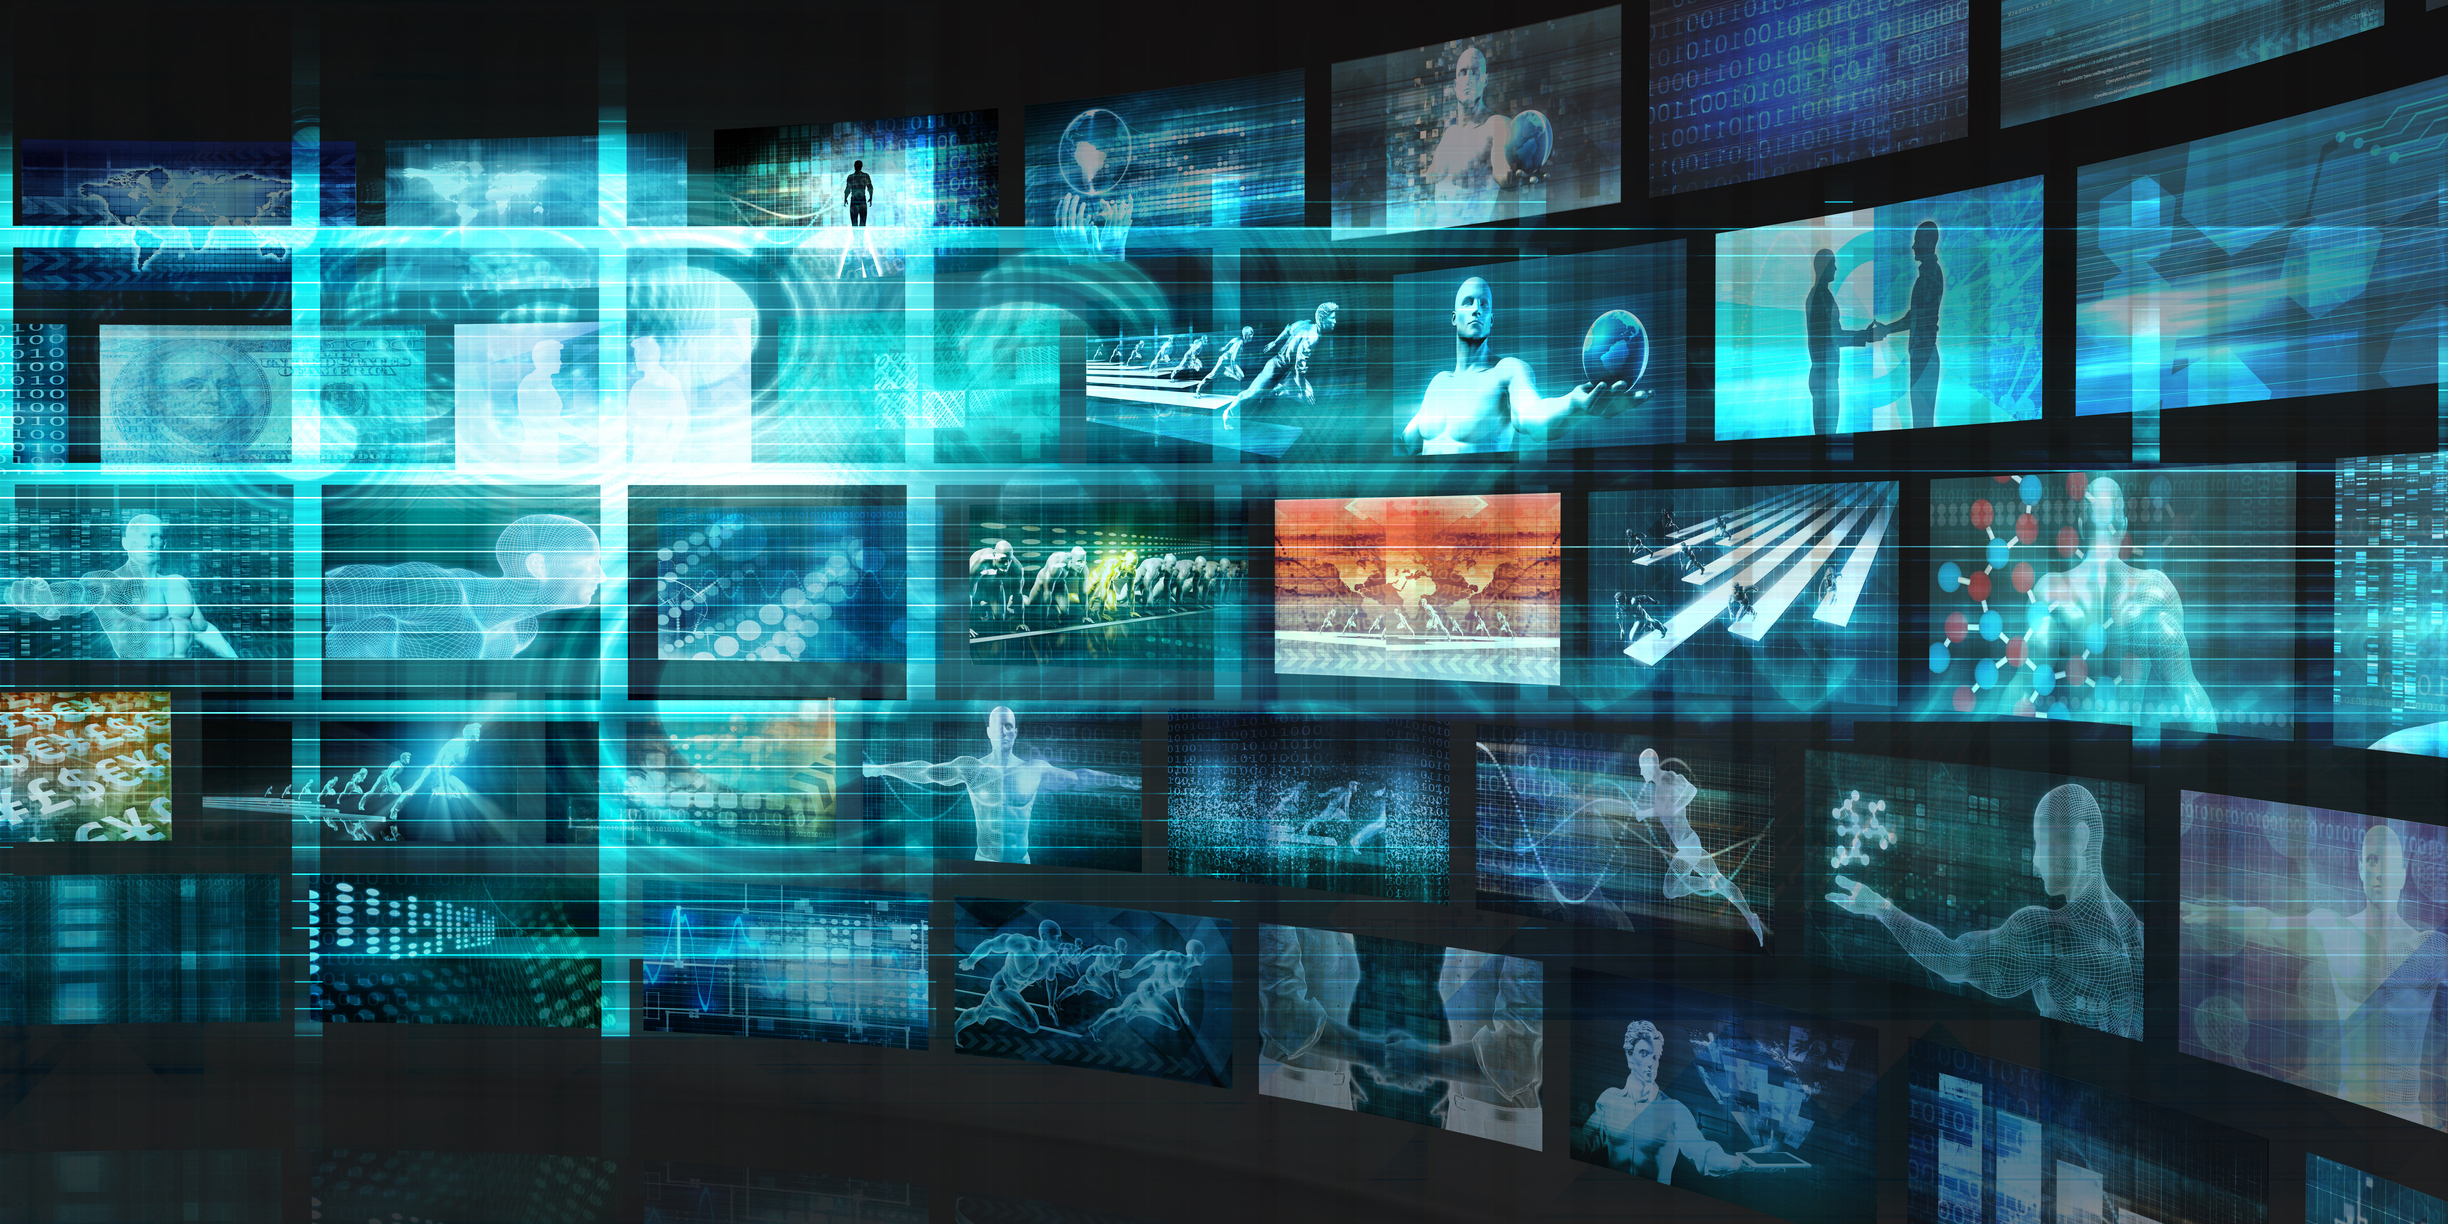 Why Programmatic Deals Are the Driving Force Behind the CTV Renaissance